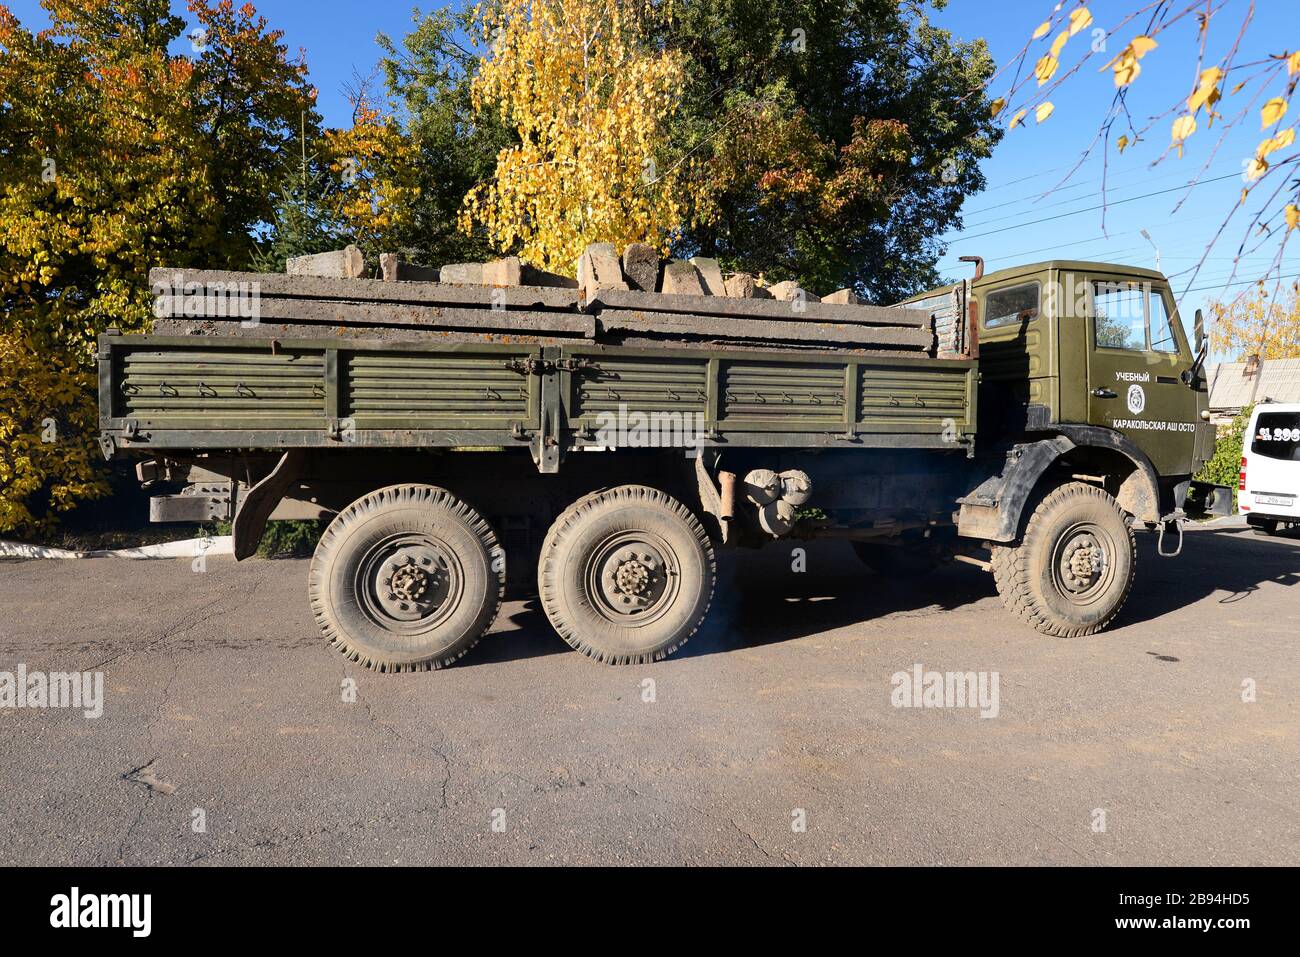 Old truck from the soviet times in Kyrgyzstan. Lateral view of military green lorry in Central Asia. Russian vehicle for heavy cargo transportation. Stock Photo